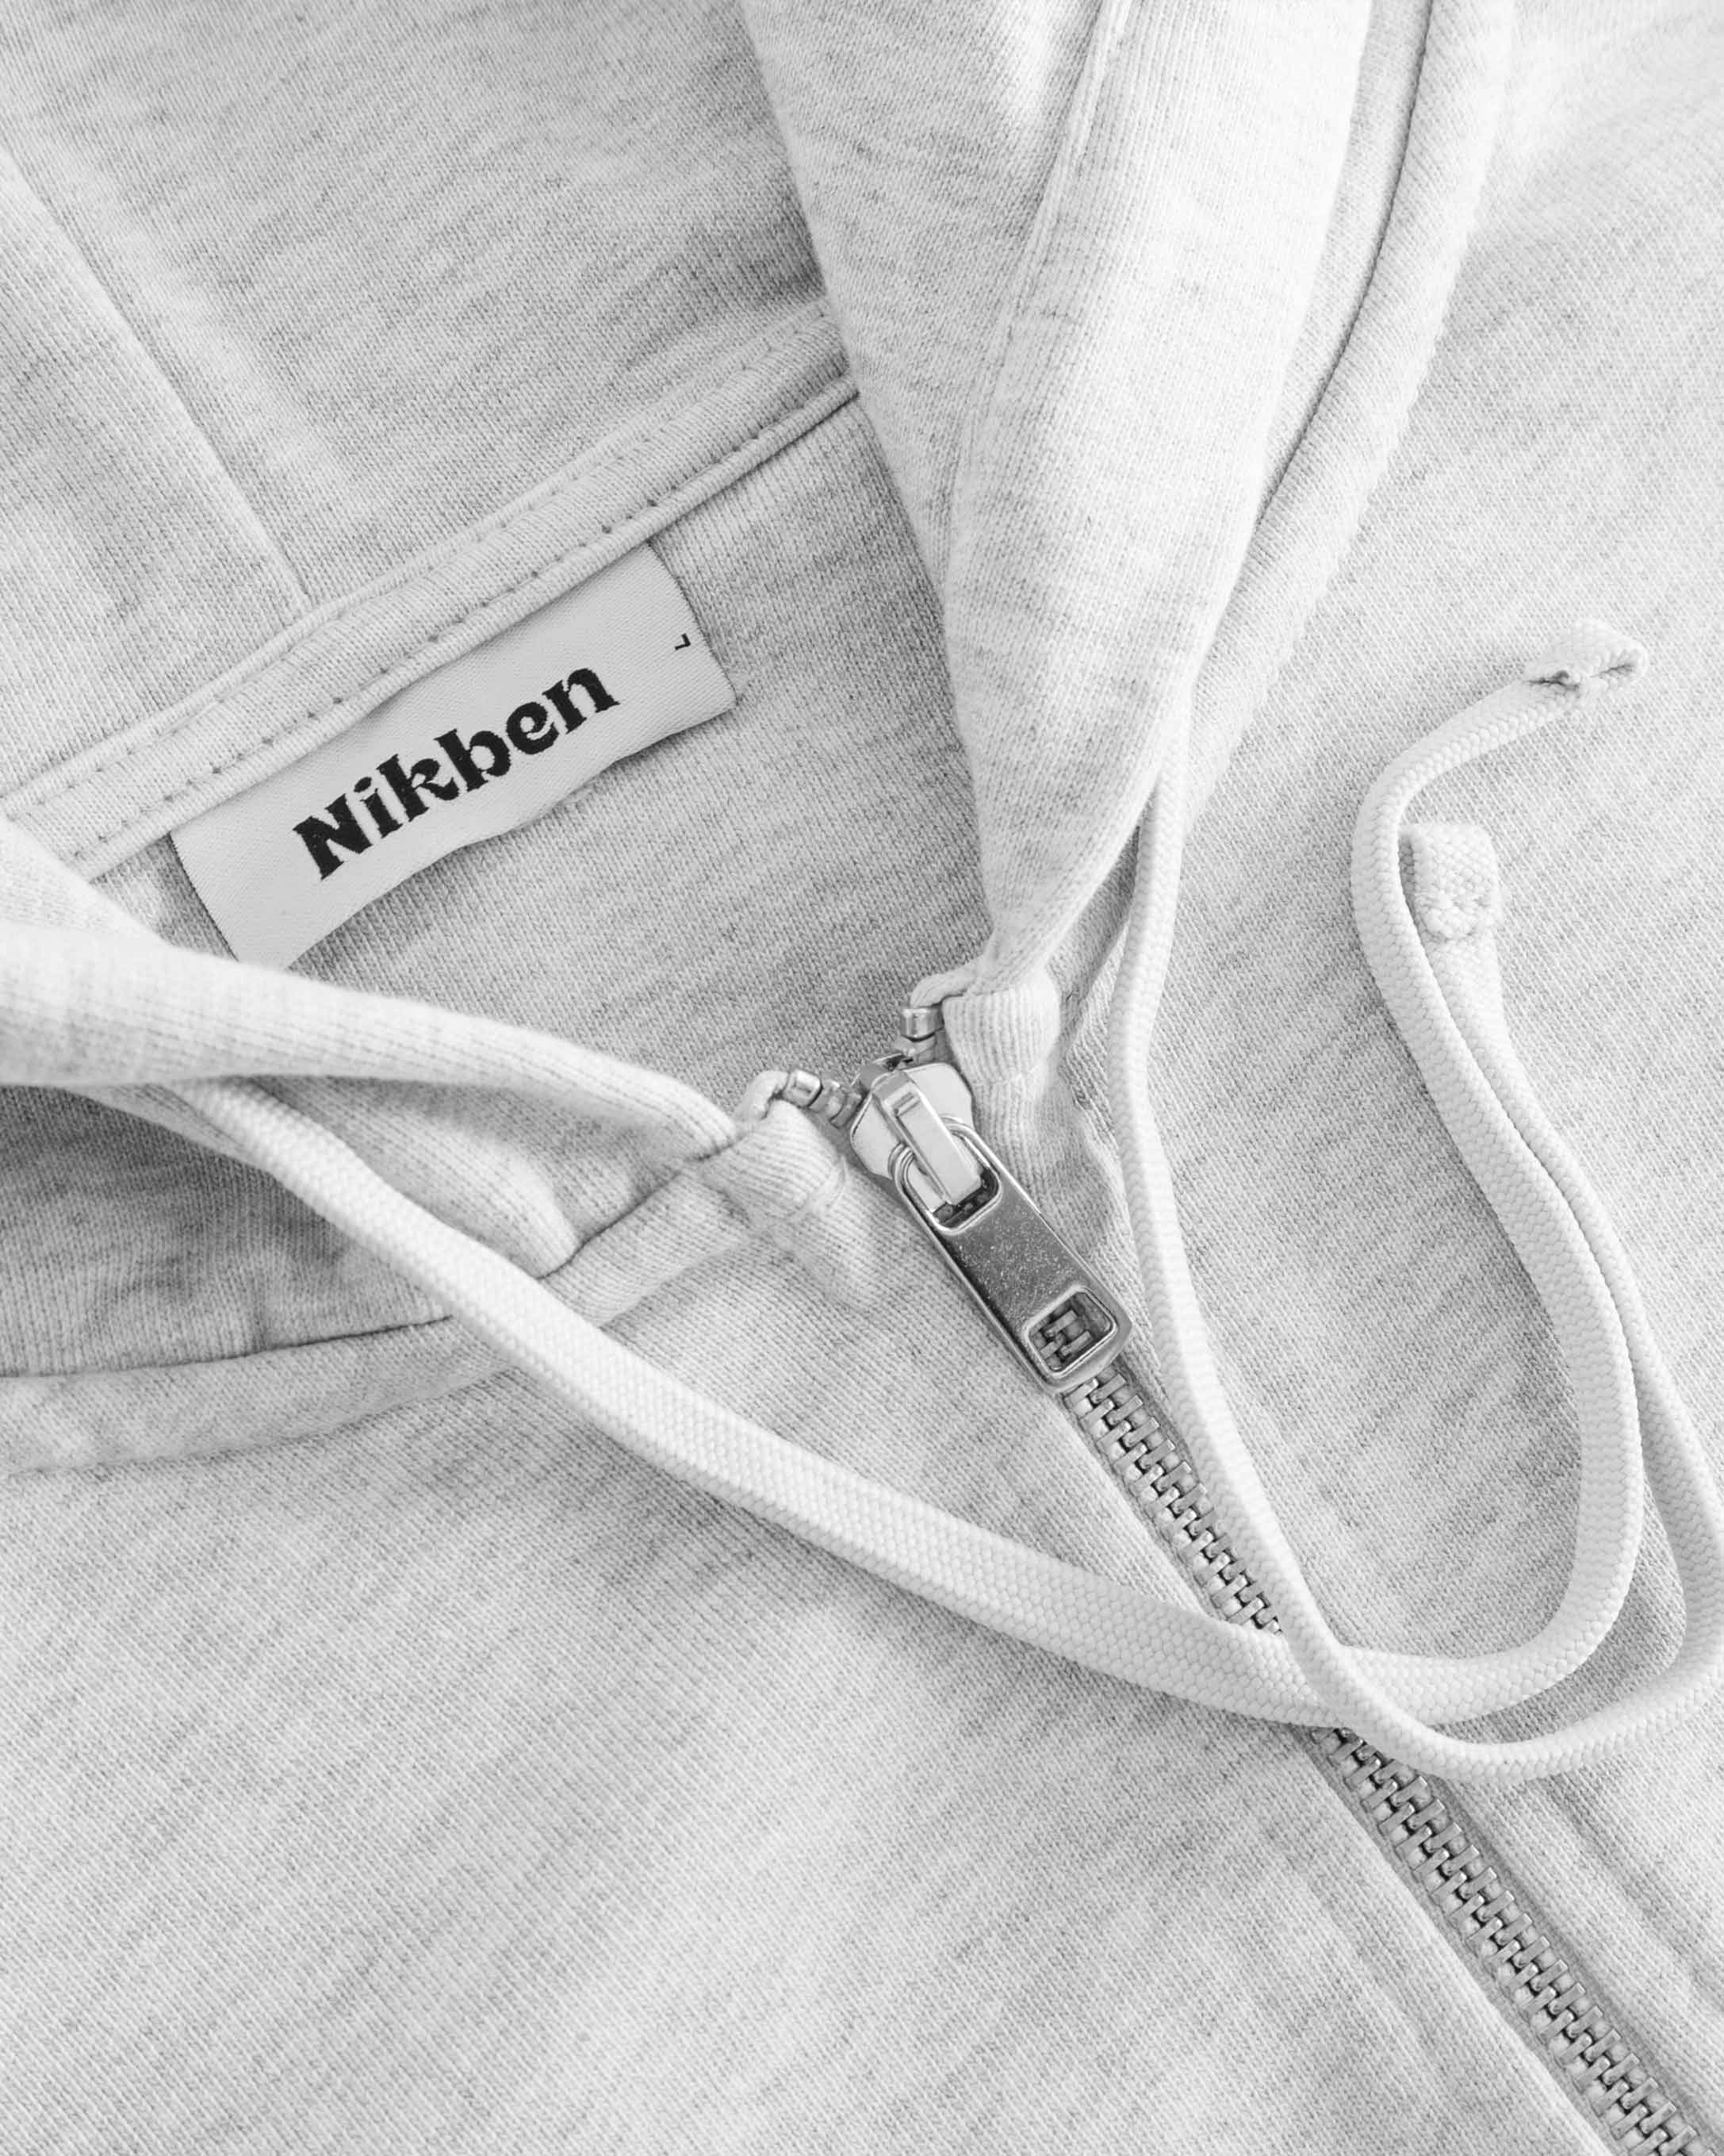 Close up view of zipper and drawstrings on grey hoodie.